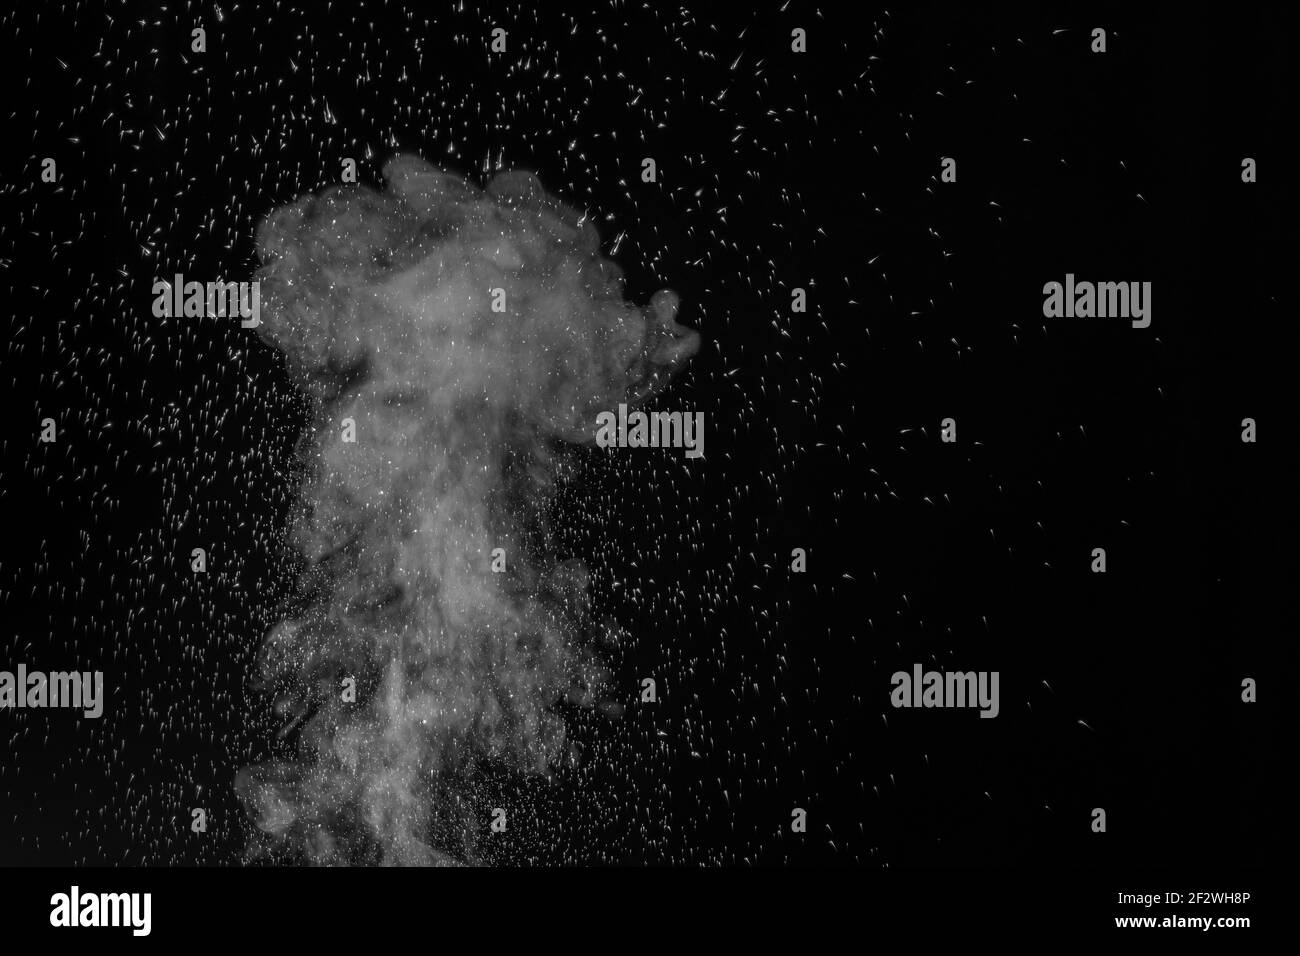 Curly white steam rising up and splashing water scattering in different directions isolated on a black background. Evaporation of liquid and condensat Stock Photo